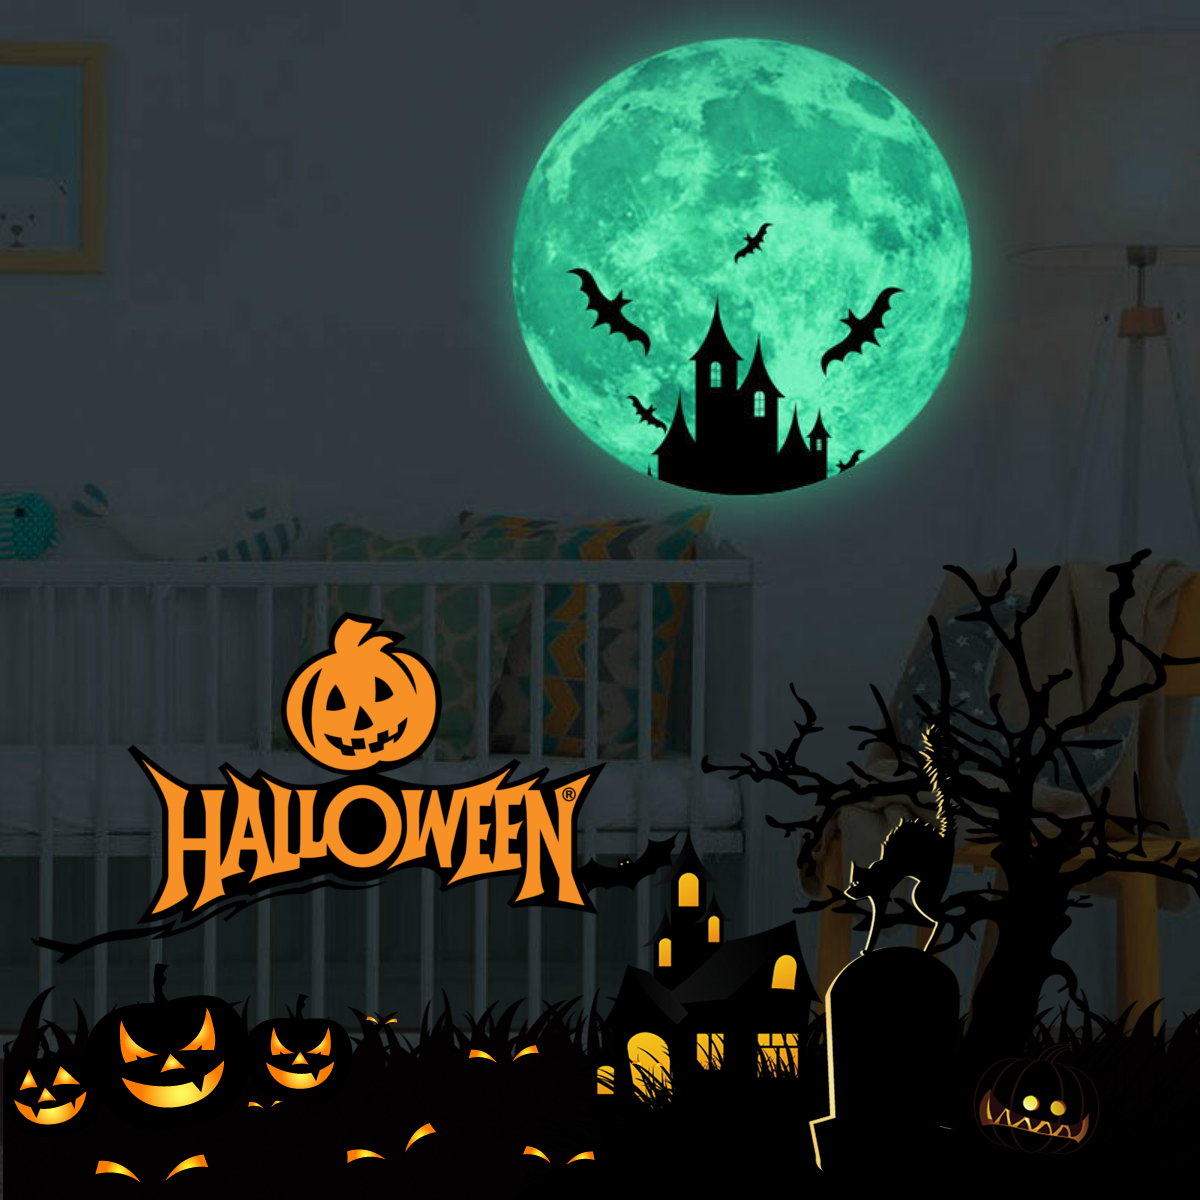 Halloween-Moon-Bat-Glow-In-Dark-Wall-Sticker-Luminous-Removable-Party-Room-Decorations-1585181-2